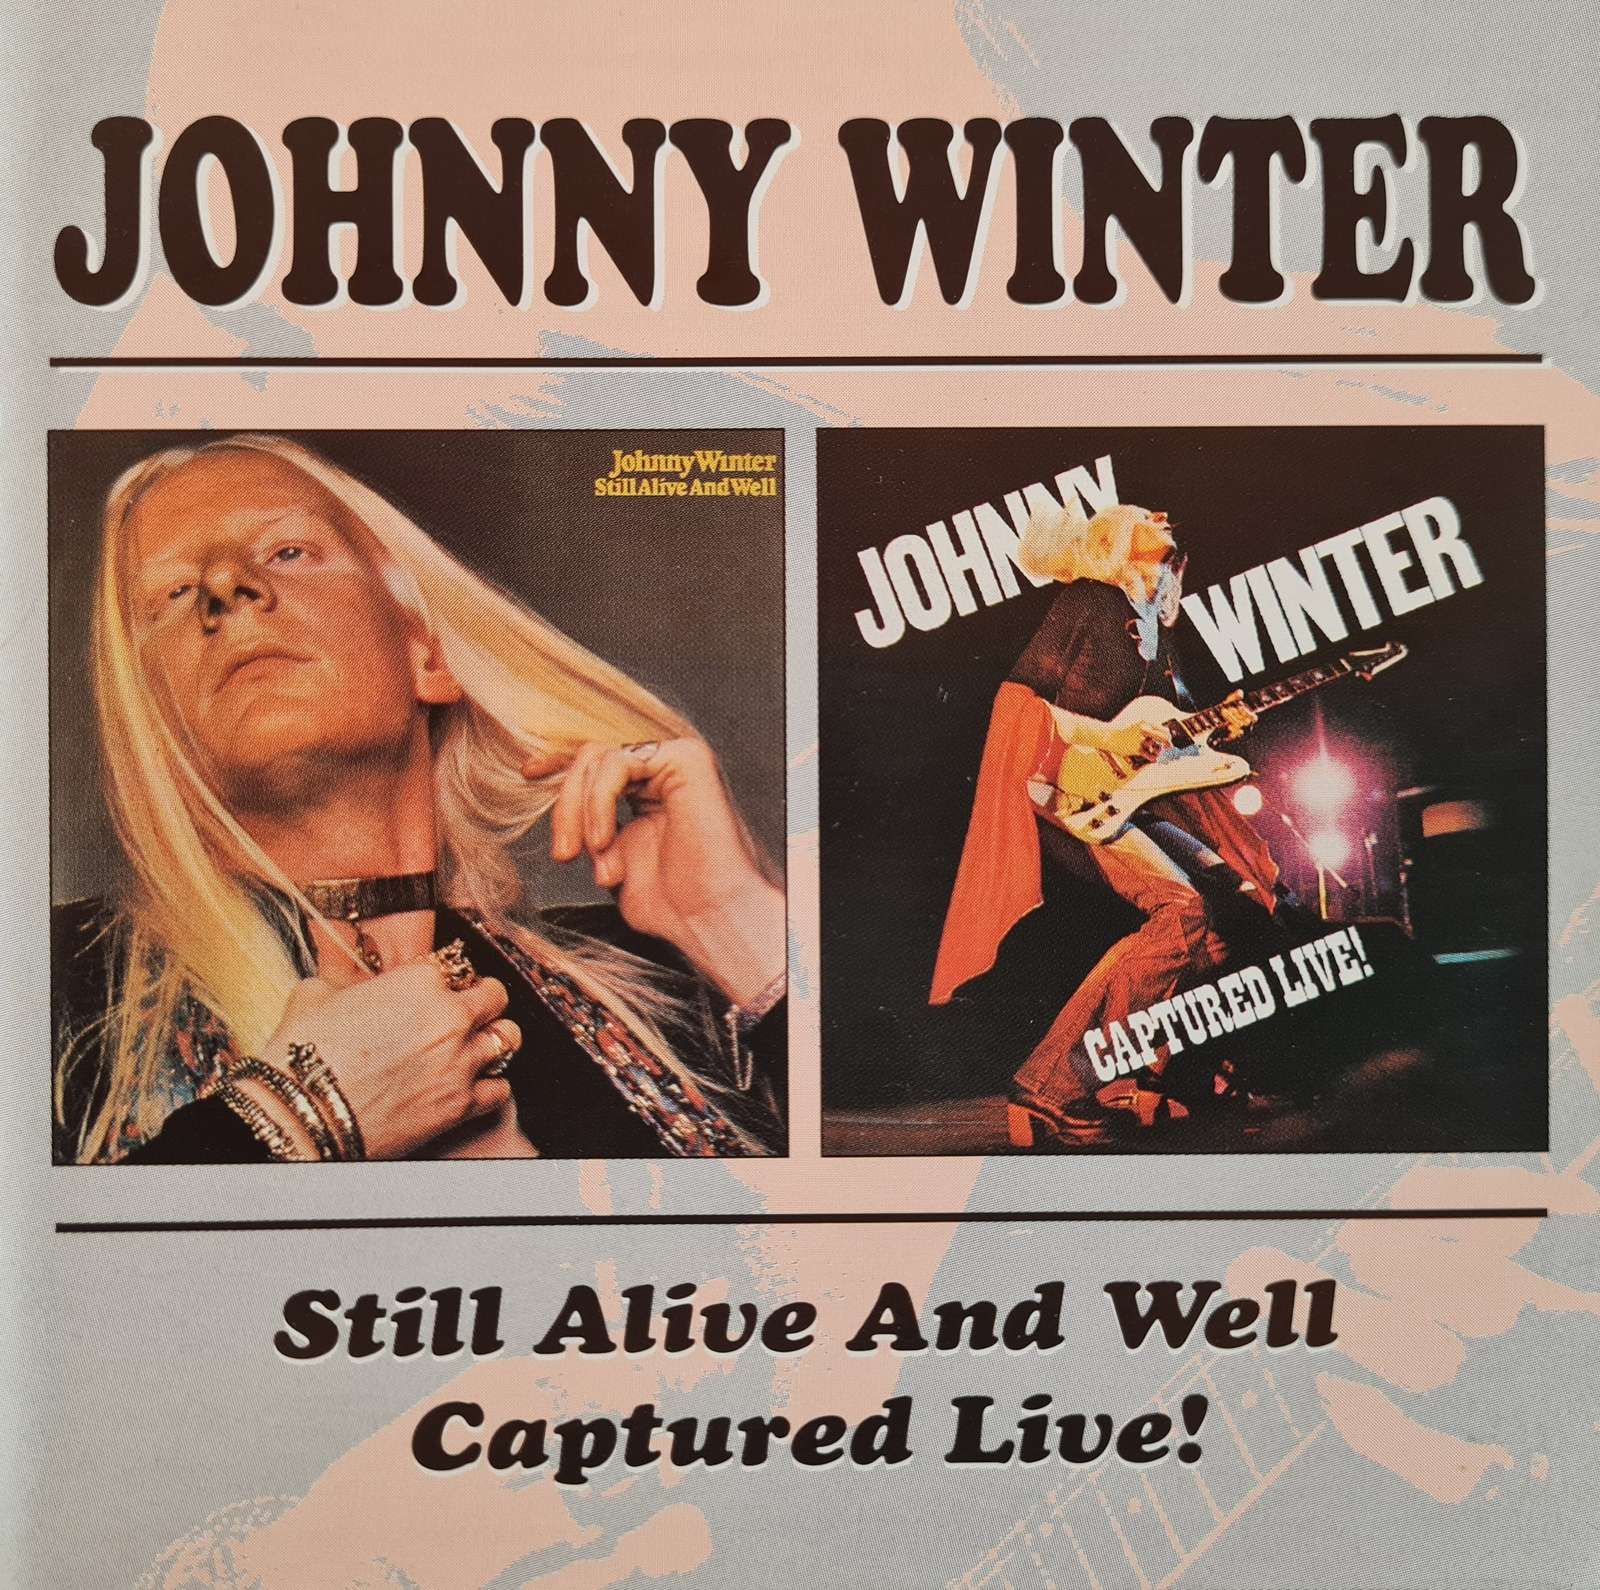 Johnny Winter - Still Alive And Well Captured Live! (CD)